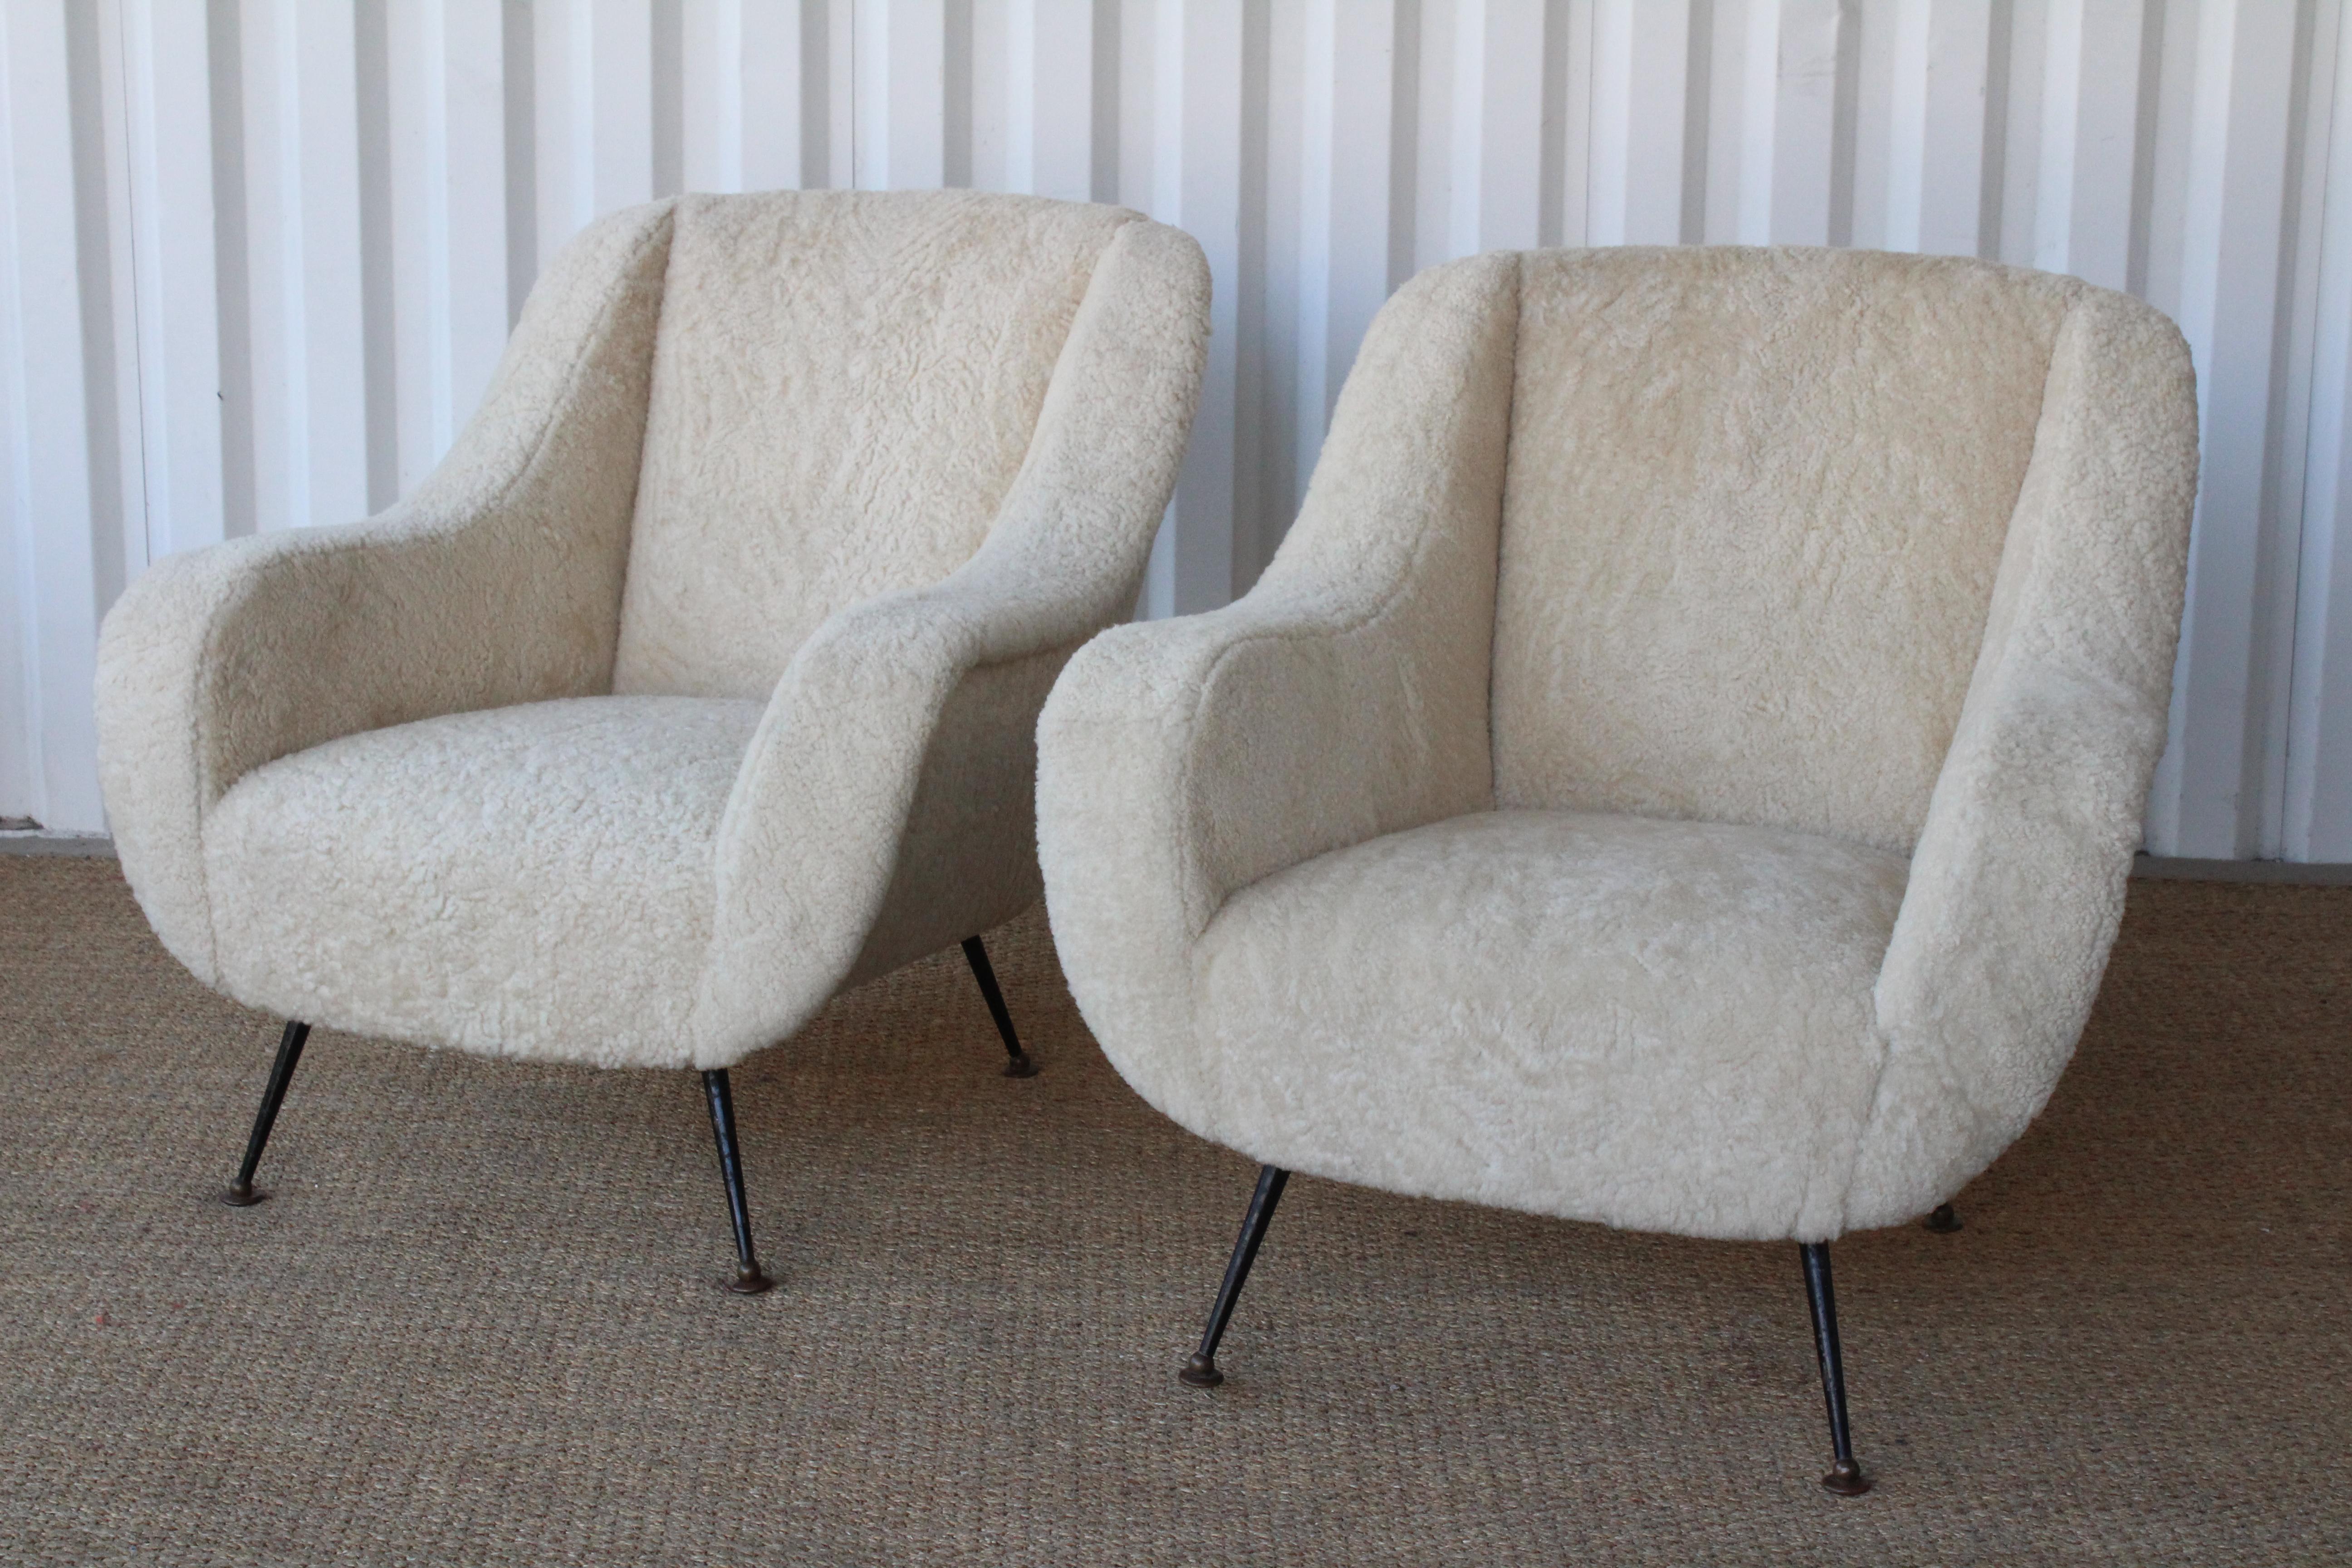 Brass Pair of Mid Century Lounge Chairs in Sheepskin, Italy, 1950s